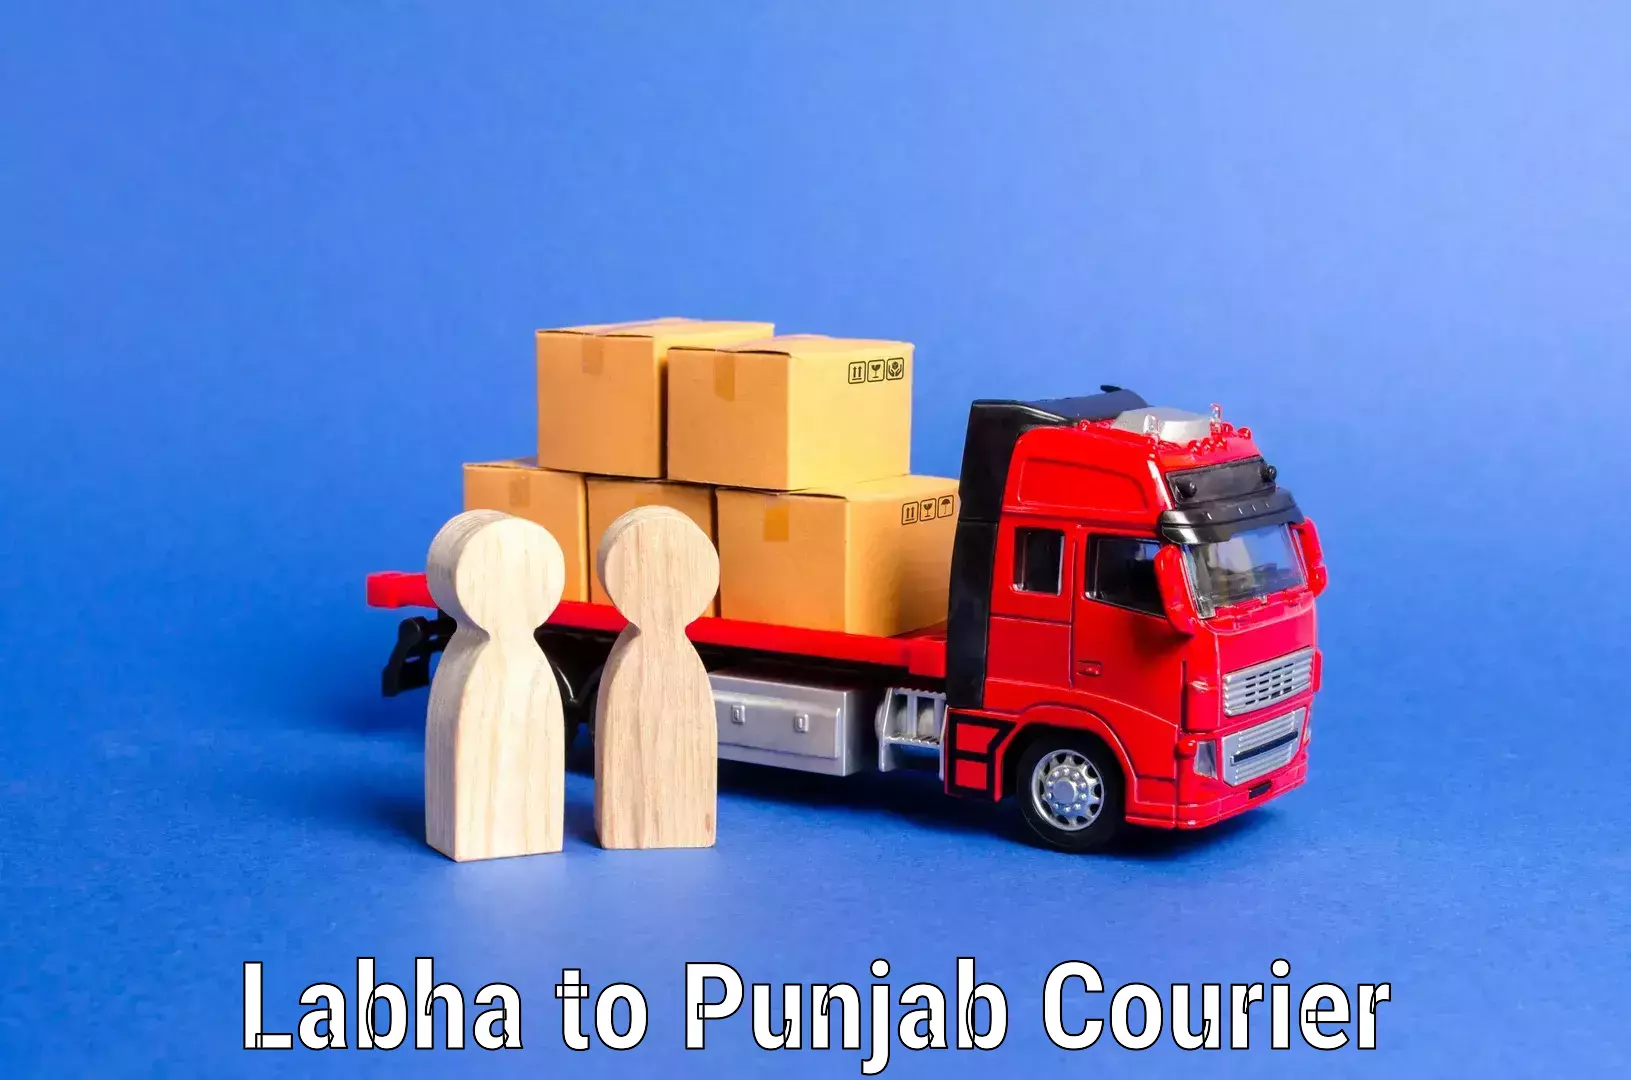 Comprehensive relocation services Labha to Punjab